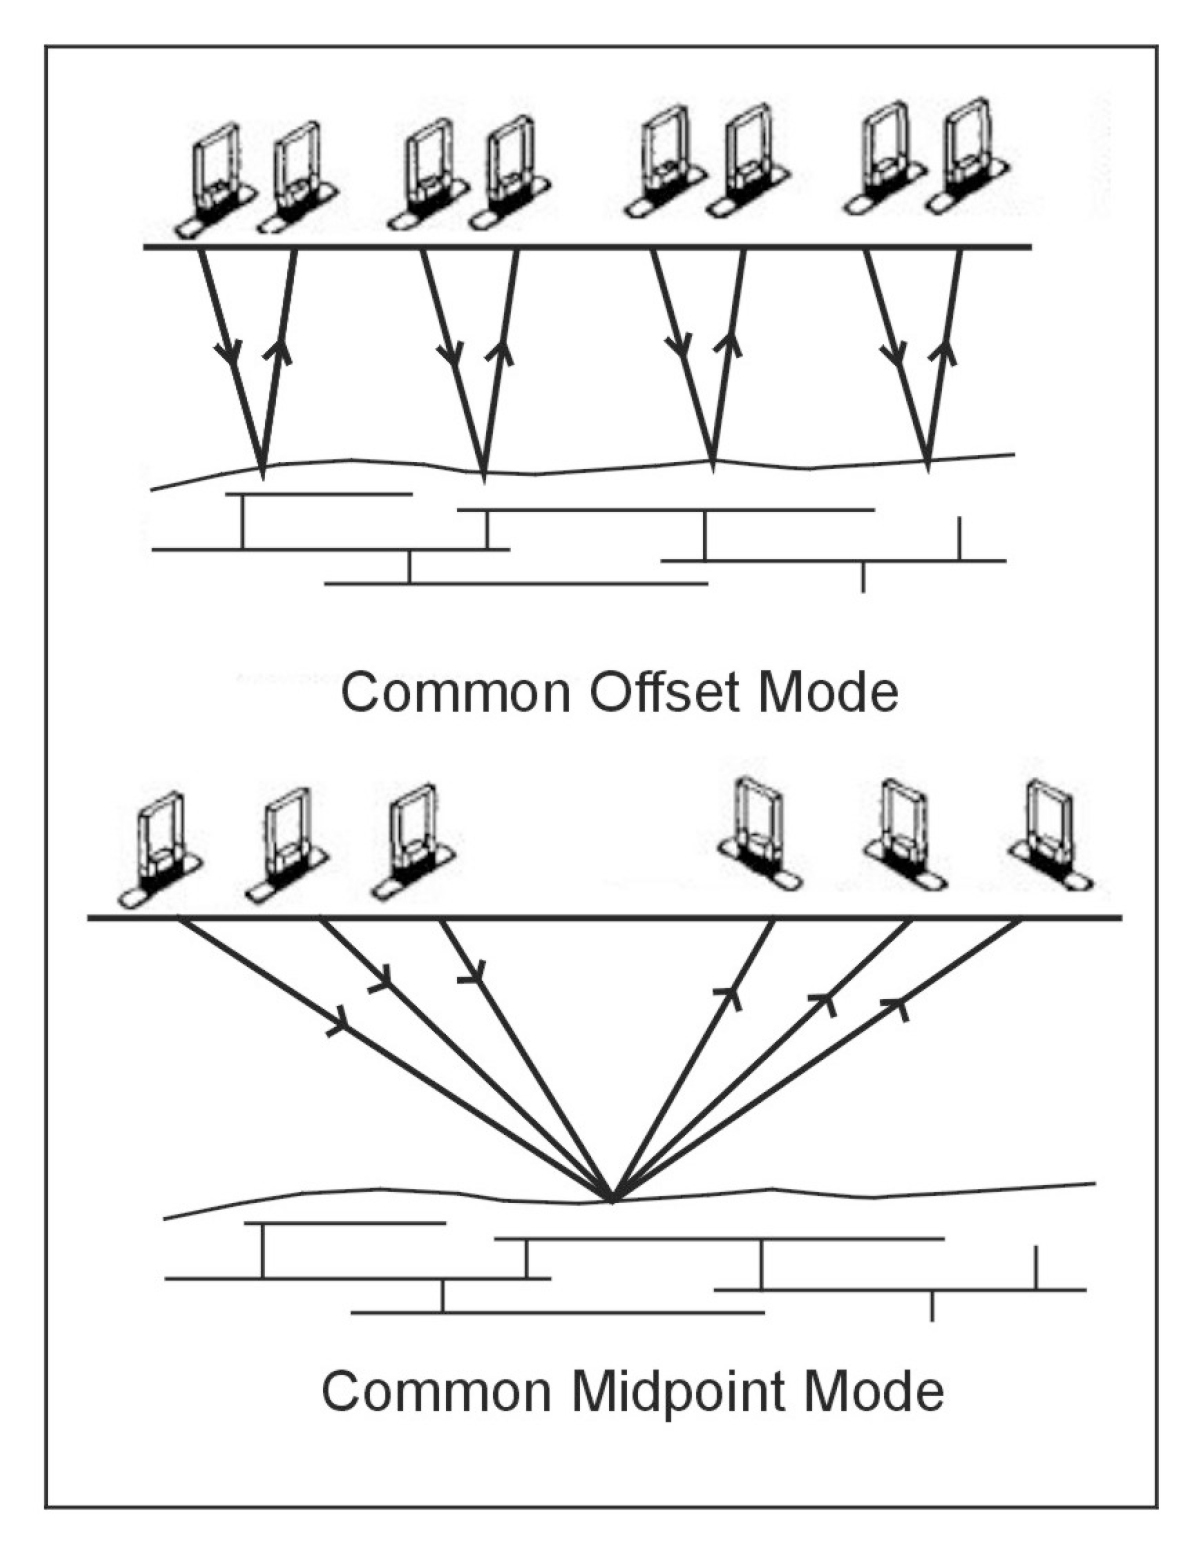 Common offset and common midpoint acquisition modes. (Annan, 1992).